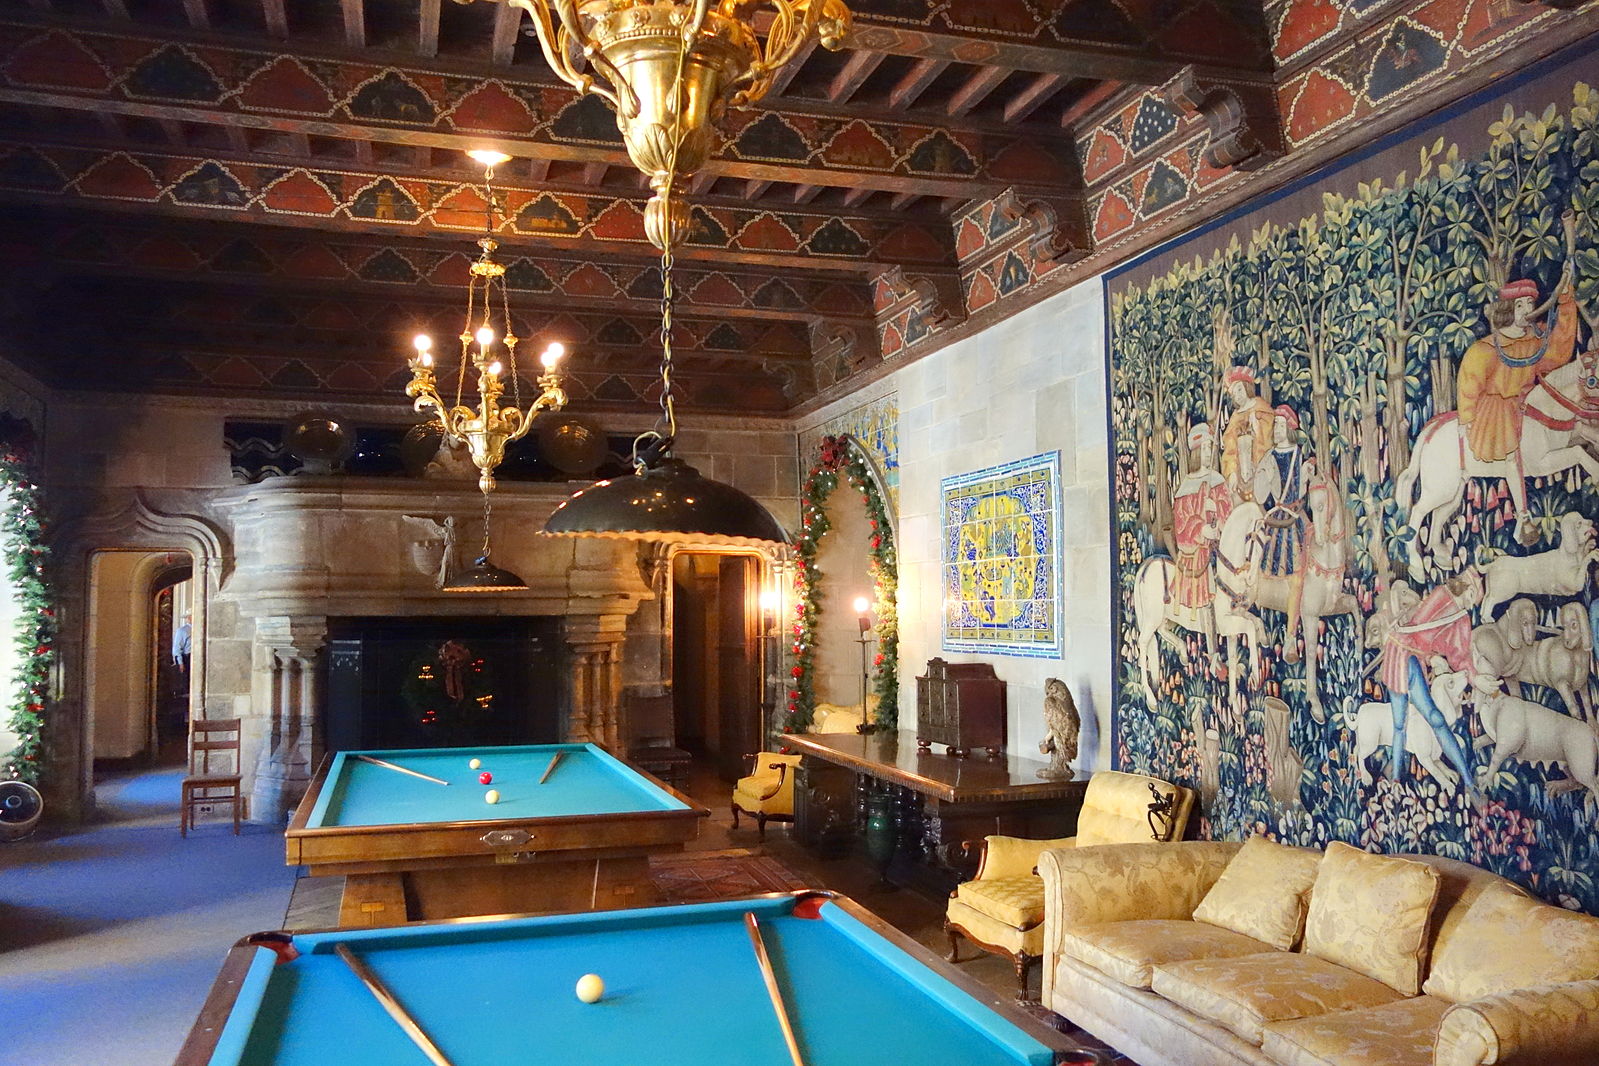 An ornate room with two pool tables and large tapestry